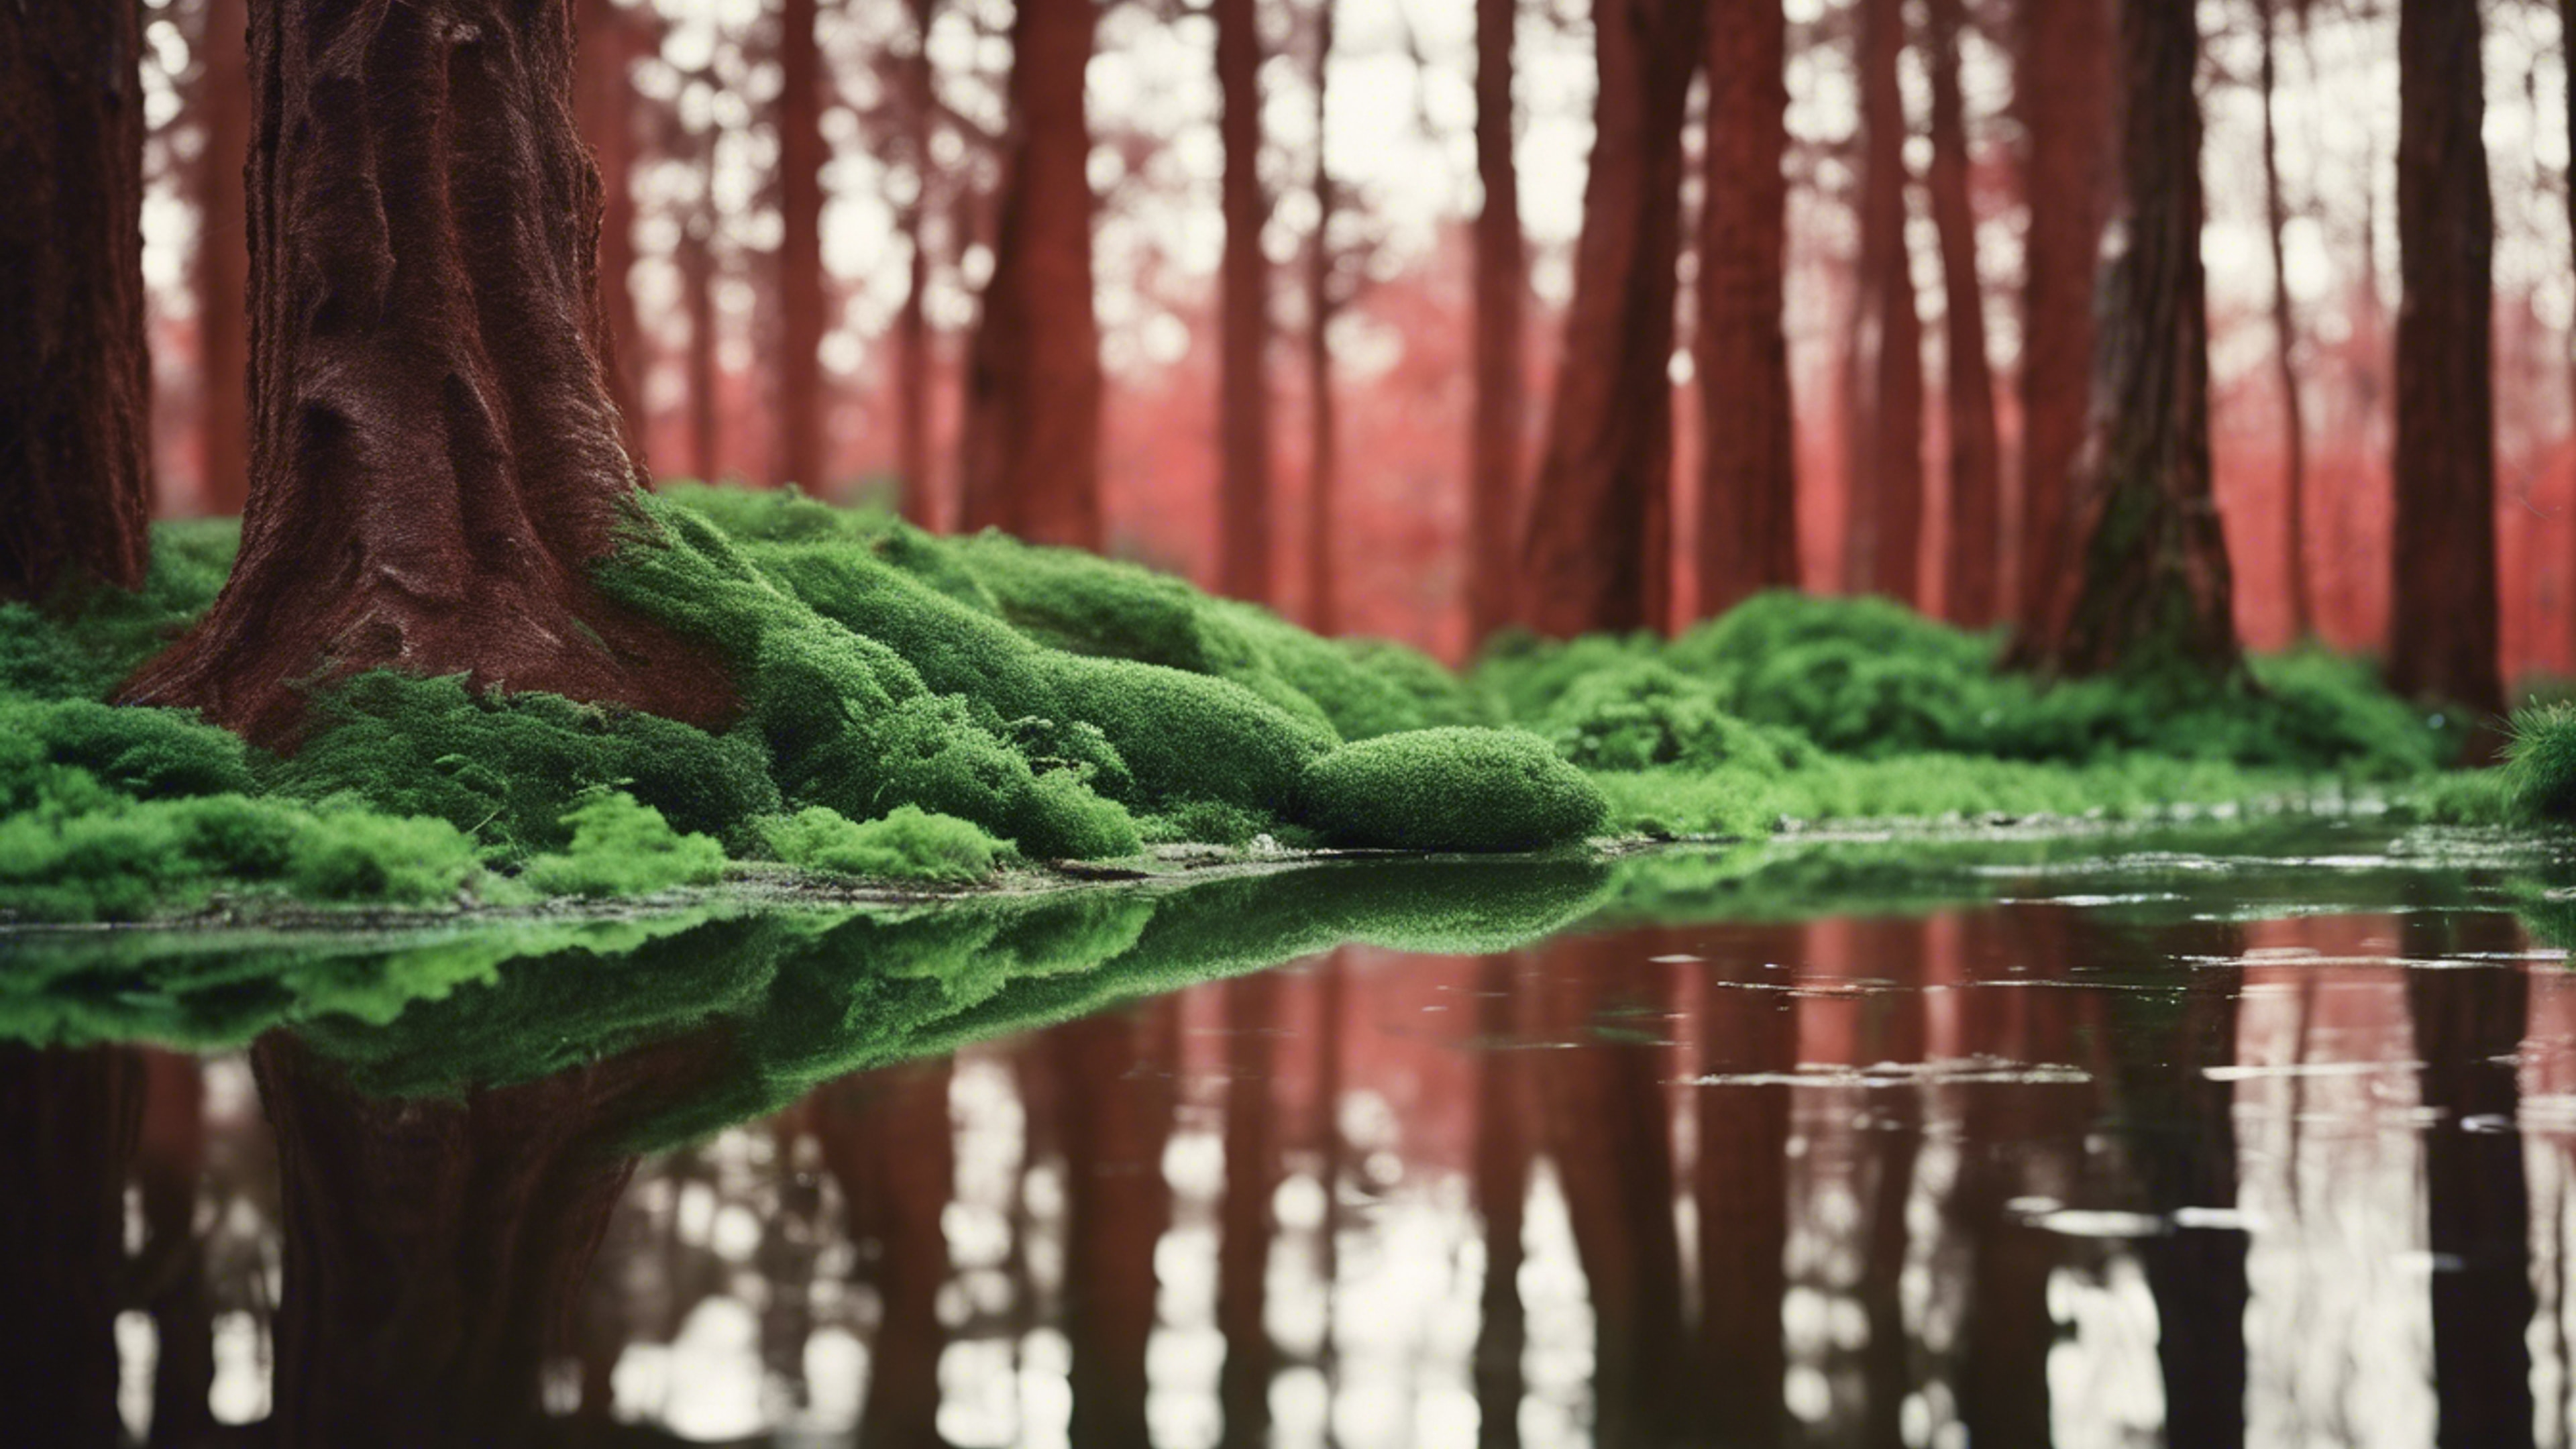 Lush, green forest reflections on a shiny, red leather surface. Tapeta na zeď[6f4e1618f75b40719461]